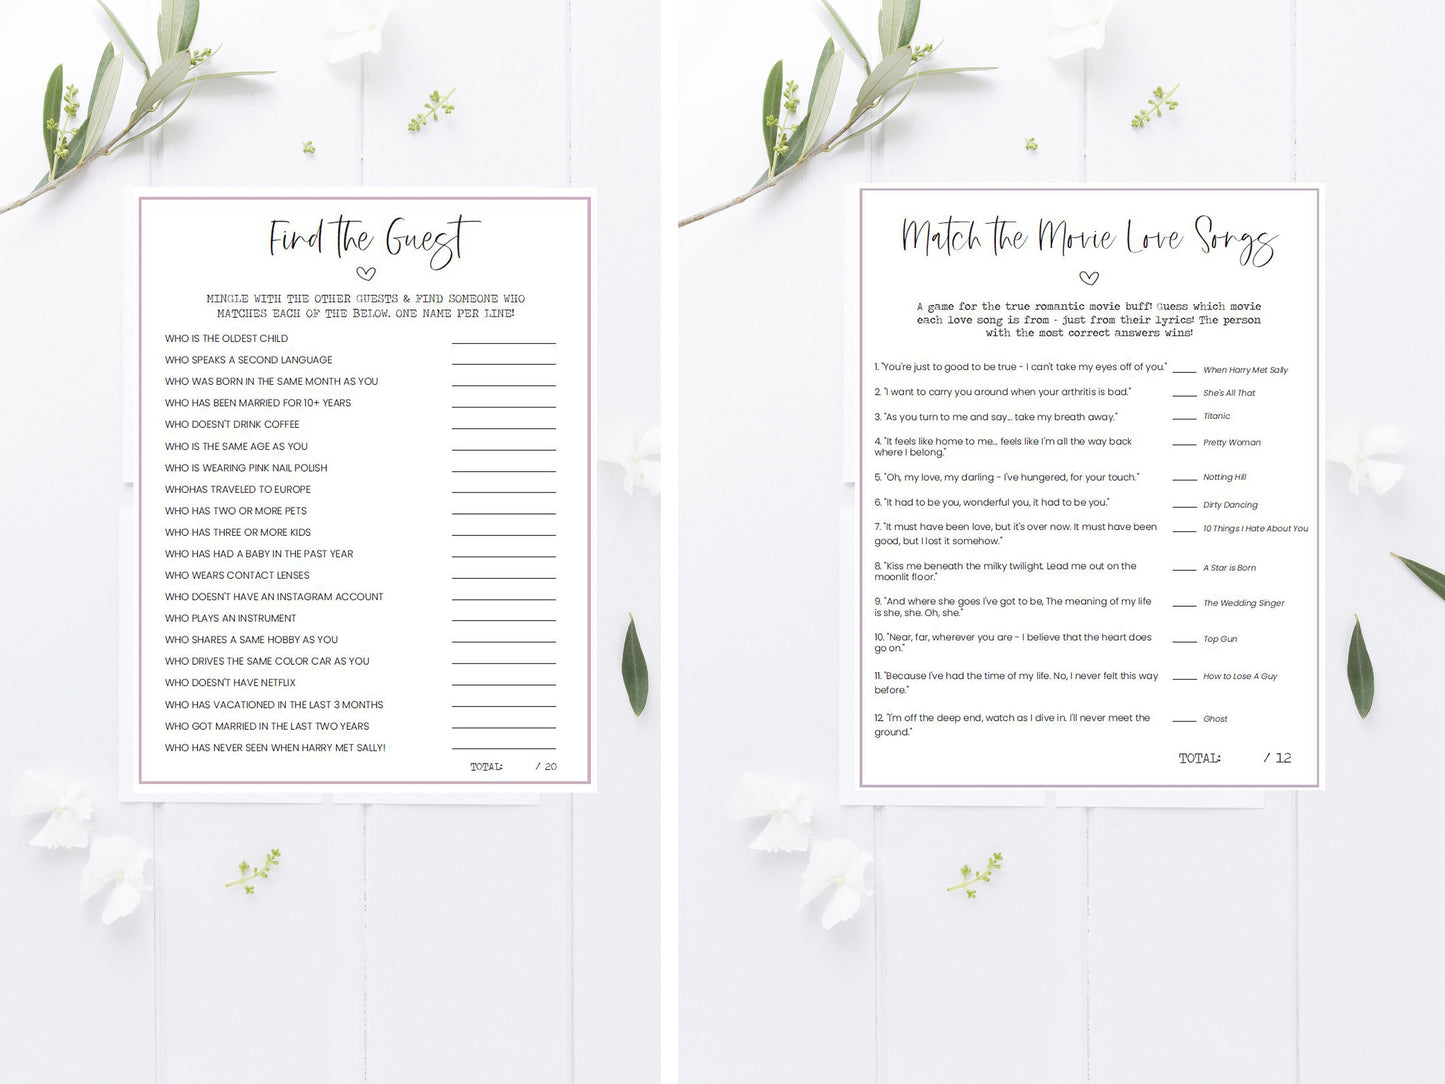 The Ultimate Romantic Movies Bridal Shower Printable Package